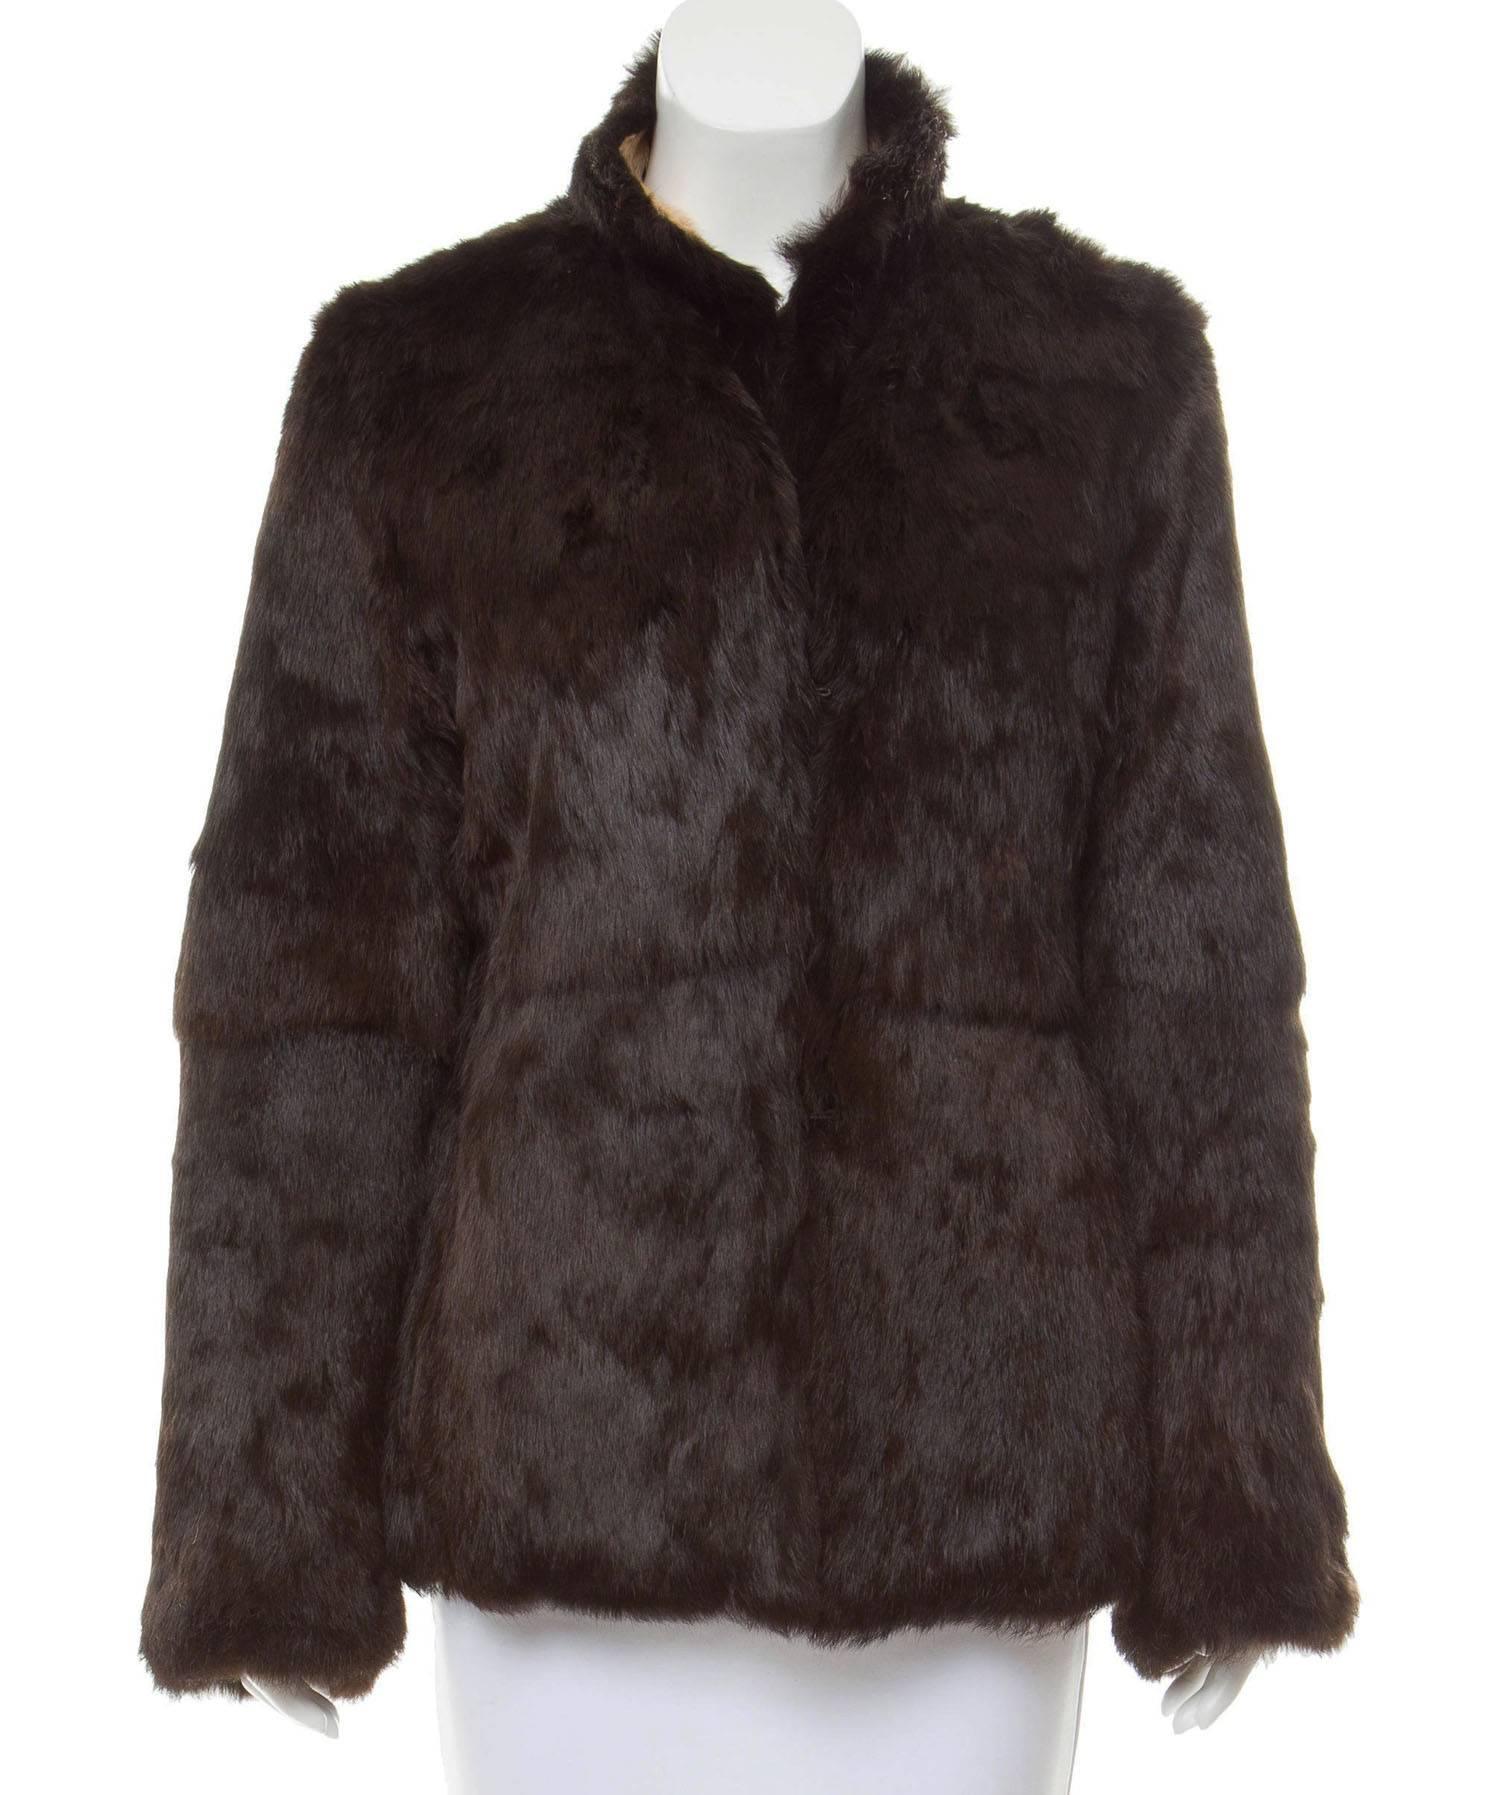 Women's New Tom Ford for Gucci 1999 Collection Reversible Beige Fur Jacket It. 42